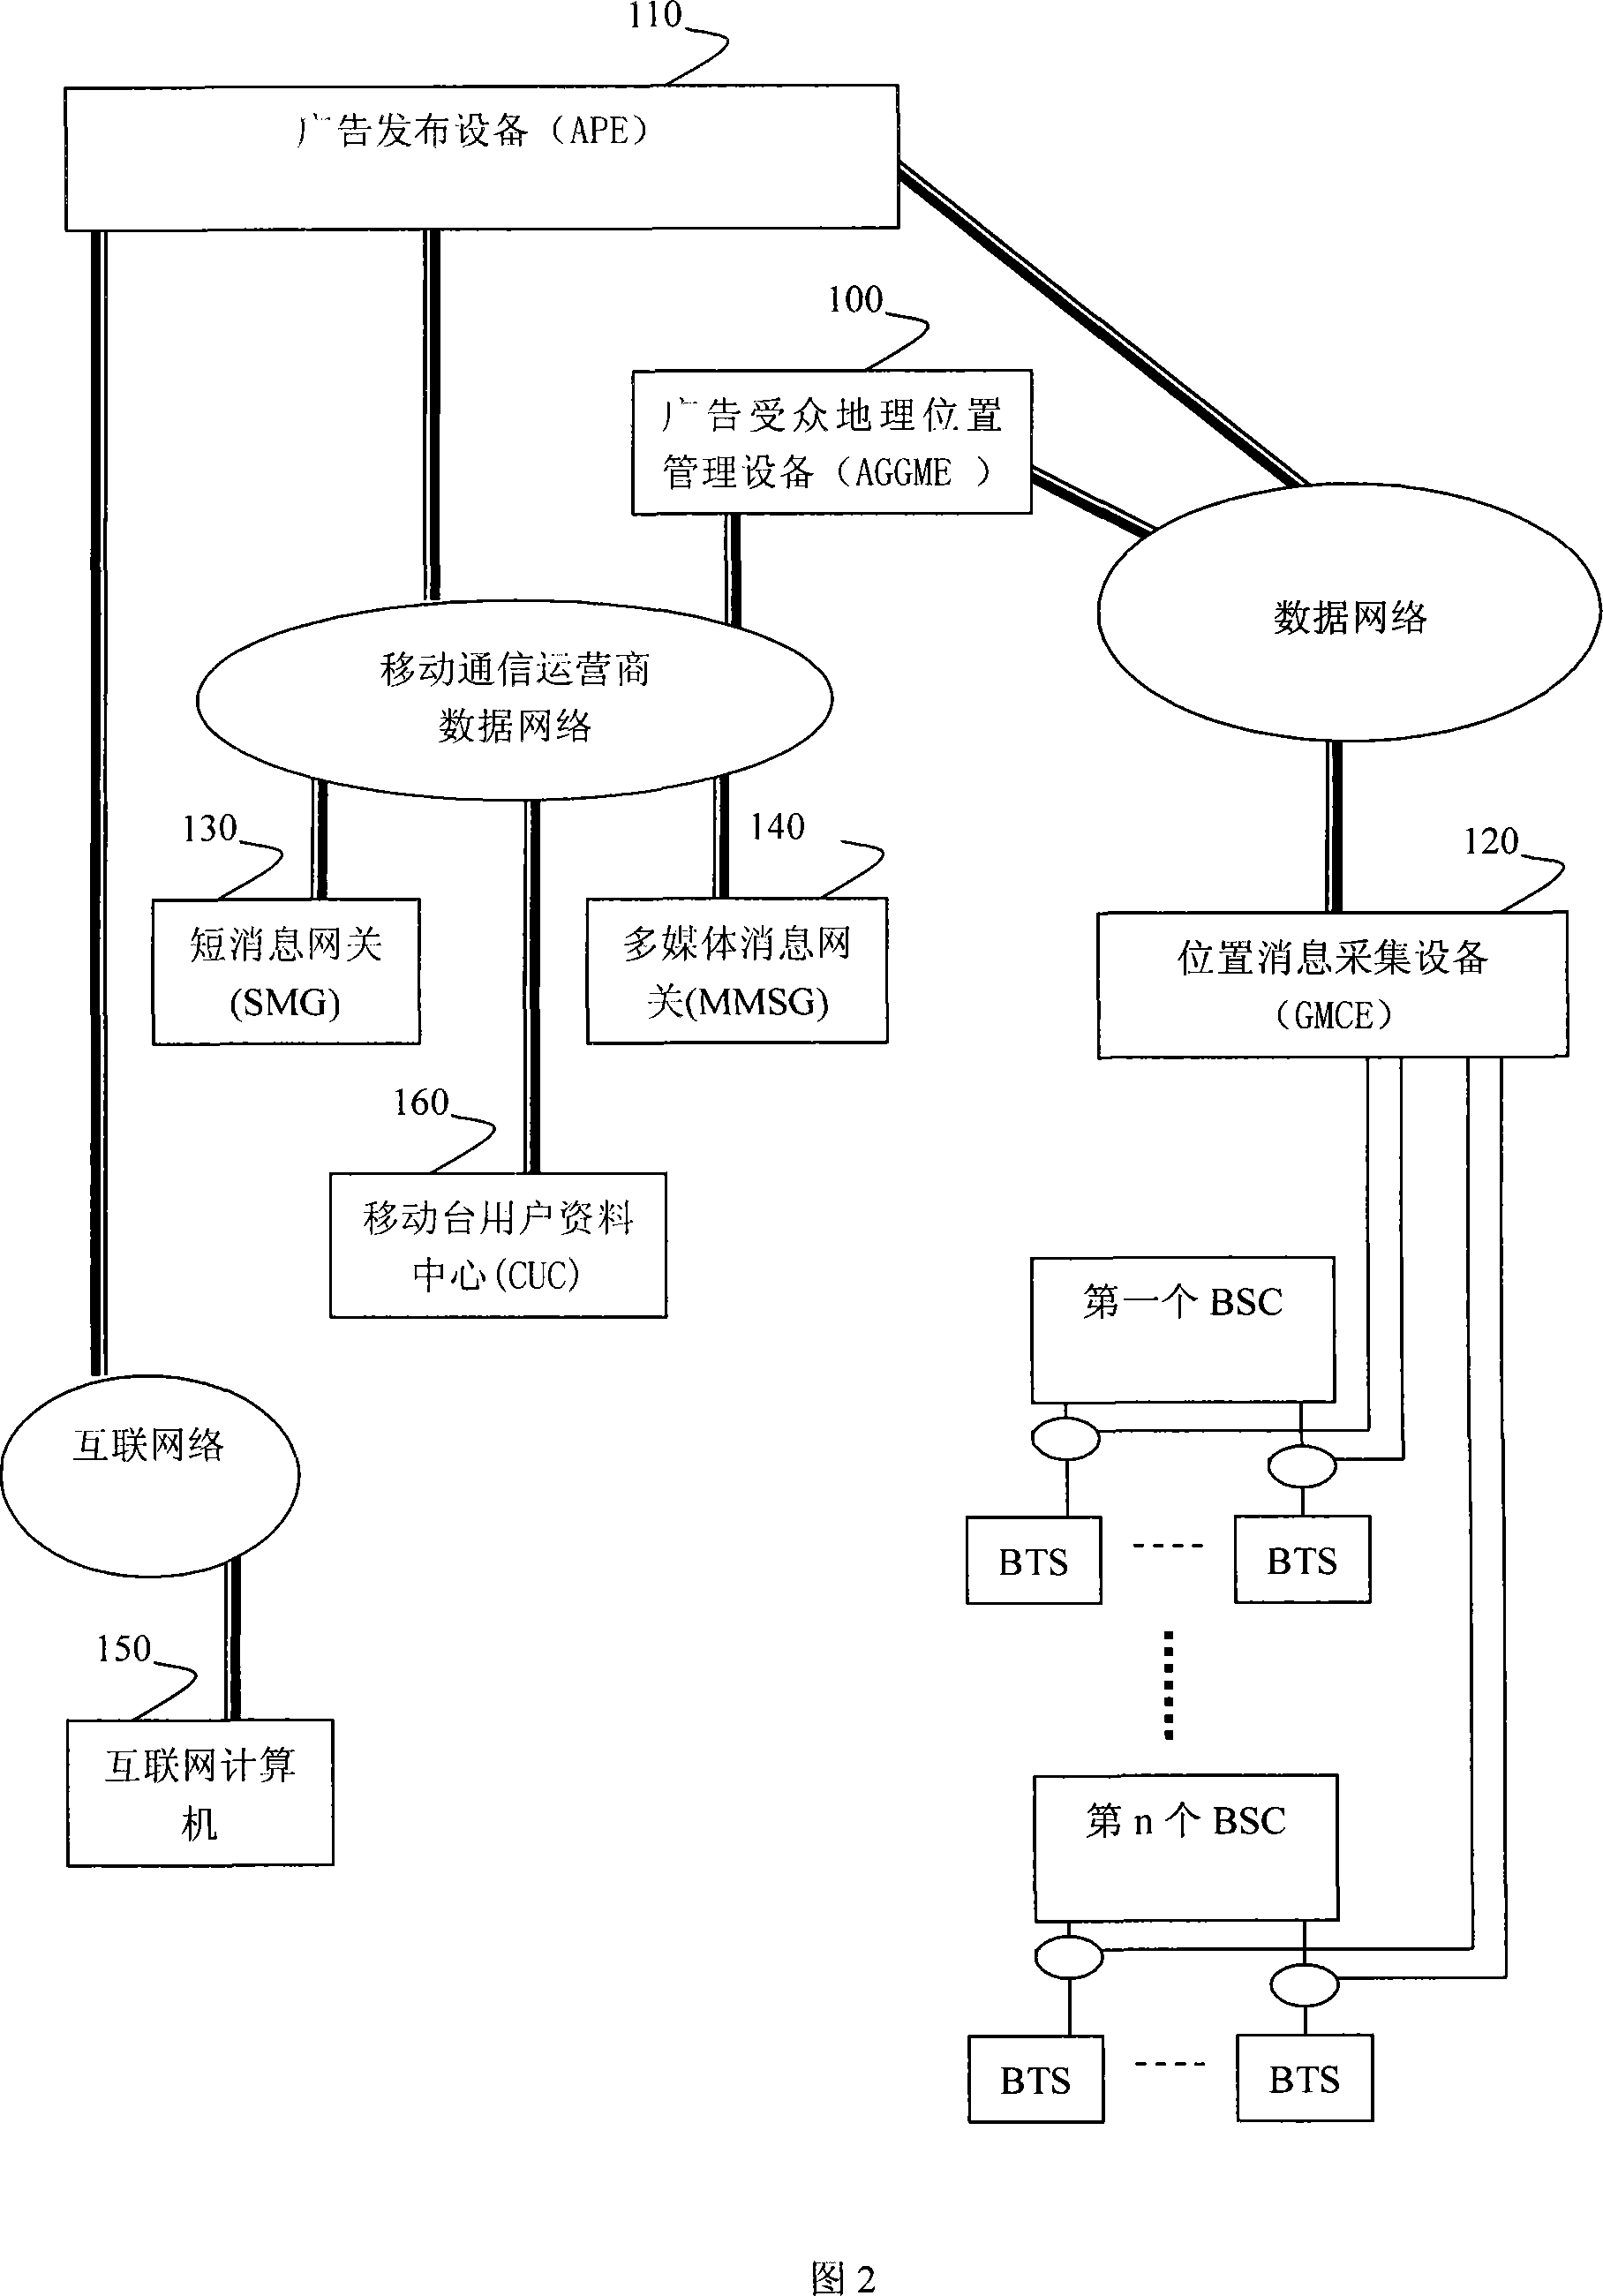 System and method for selecting advertisement audience according to wireless overlay area